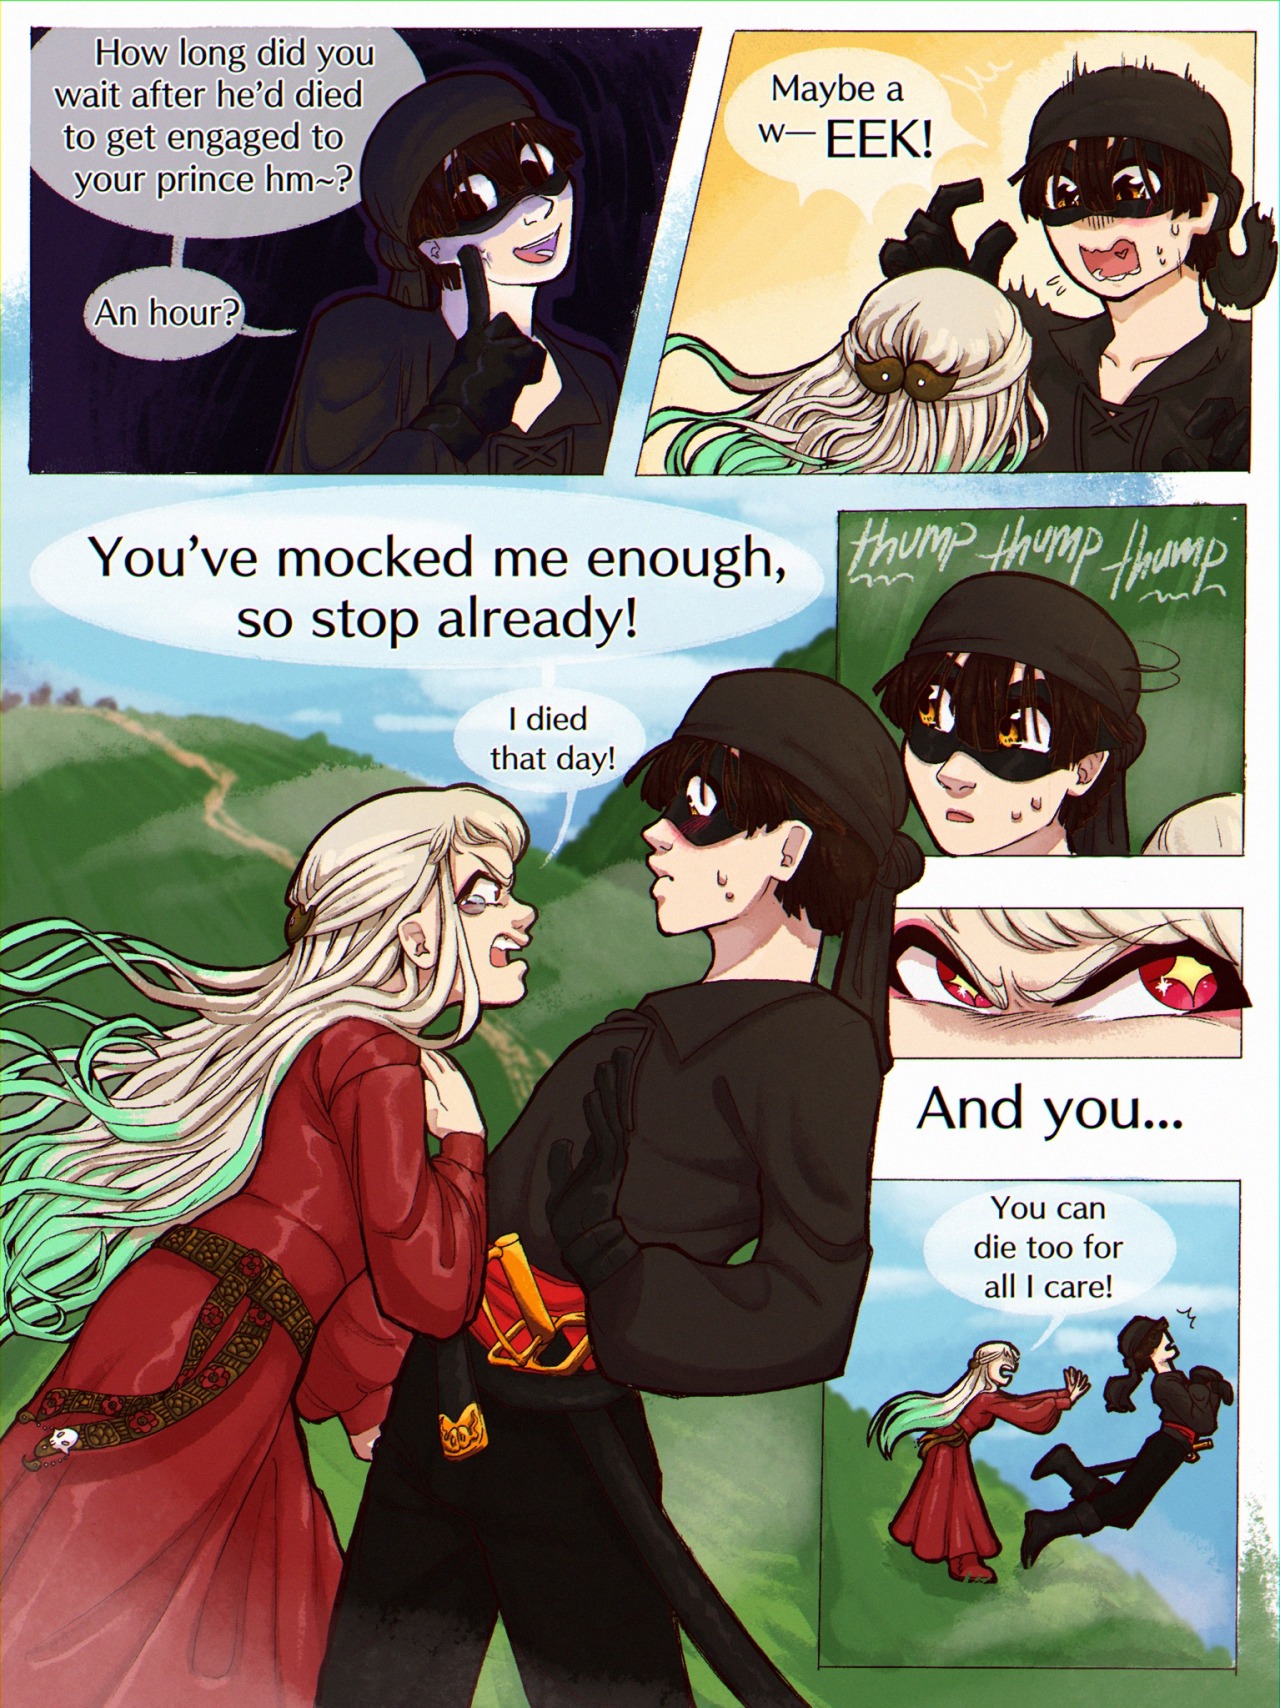 Oops — Part 2 of The Princess Bride Au because I’m still...